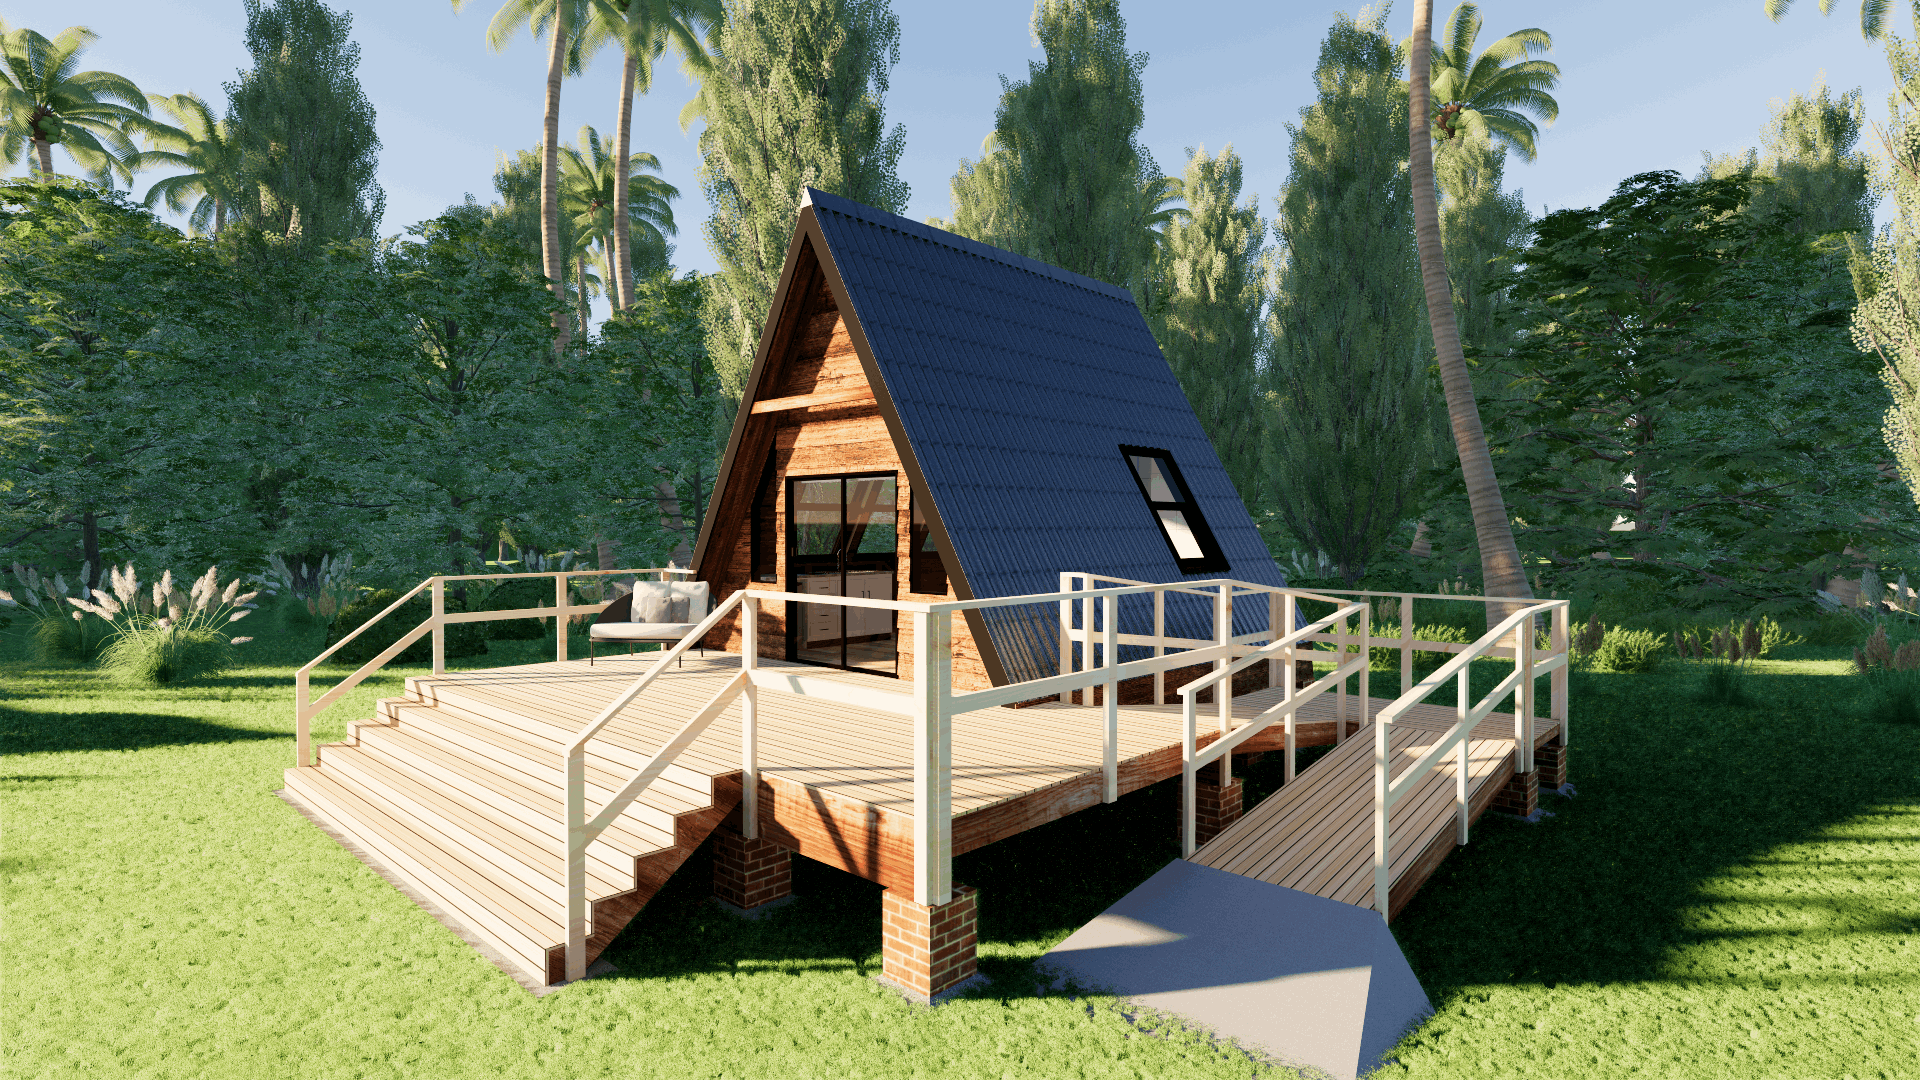 A-Frame Cabin Small - 29m2 Cabin Plans